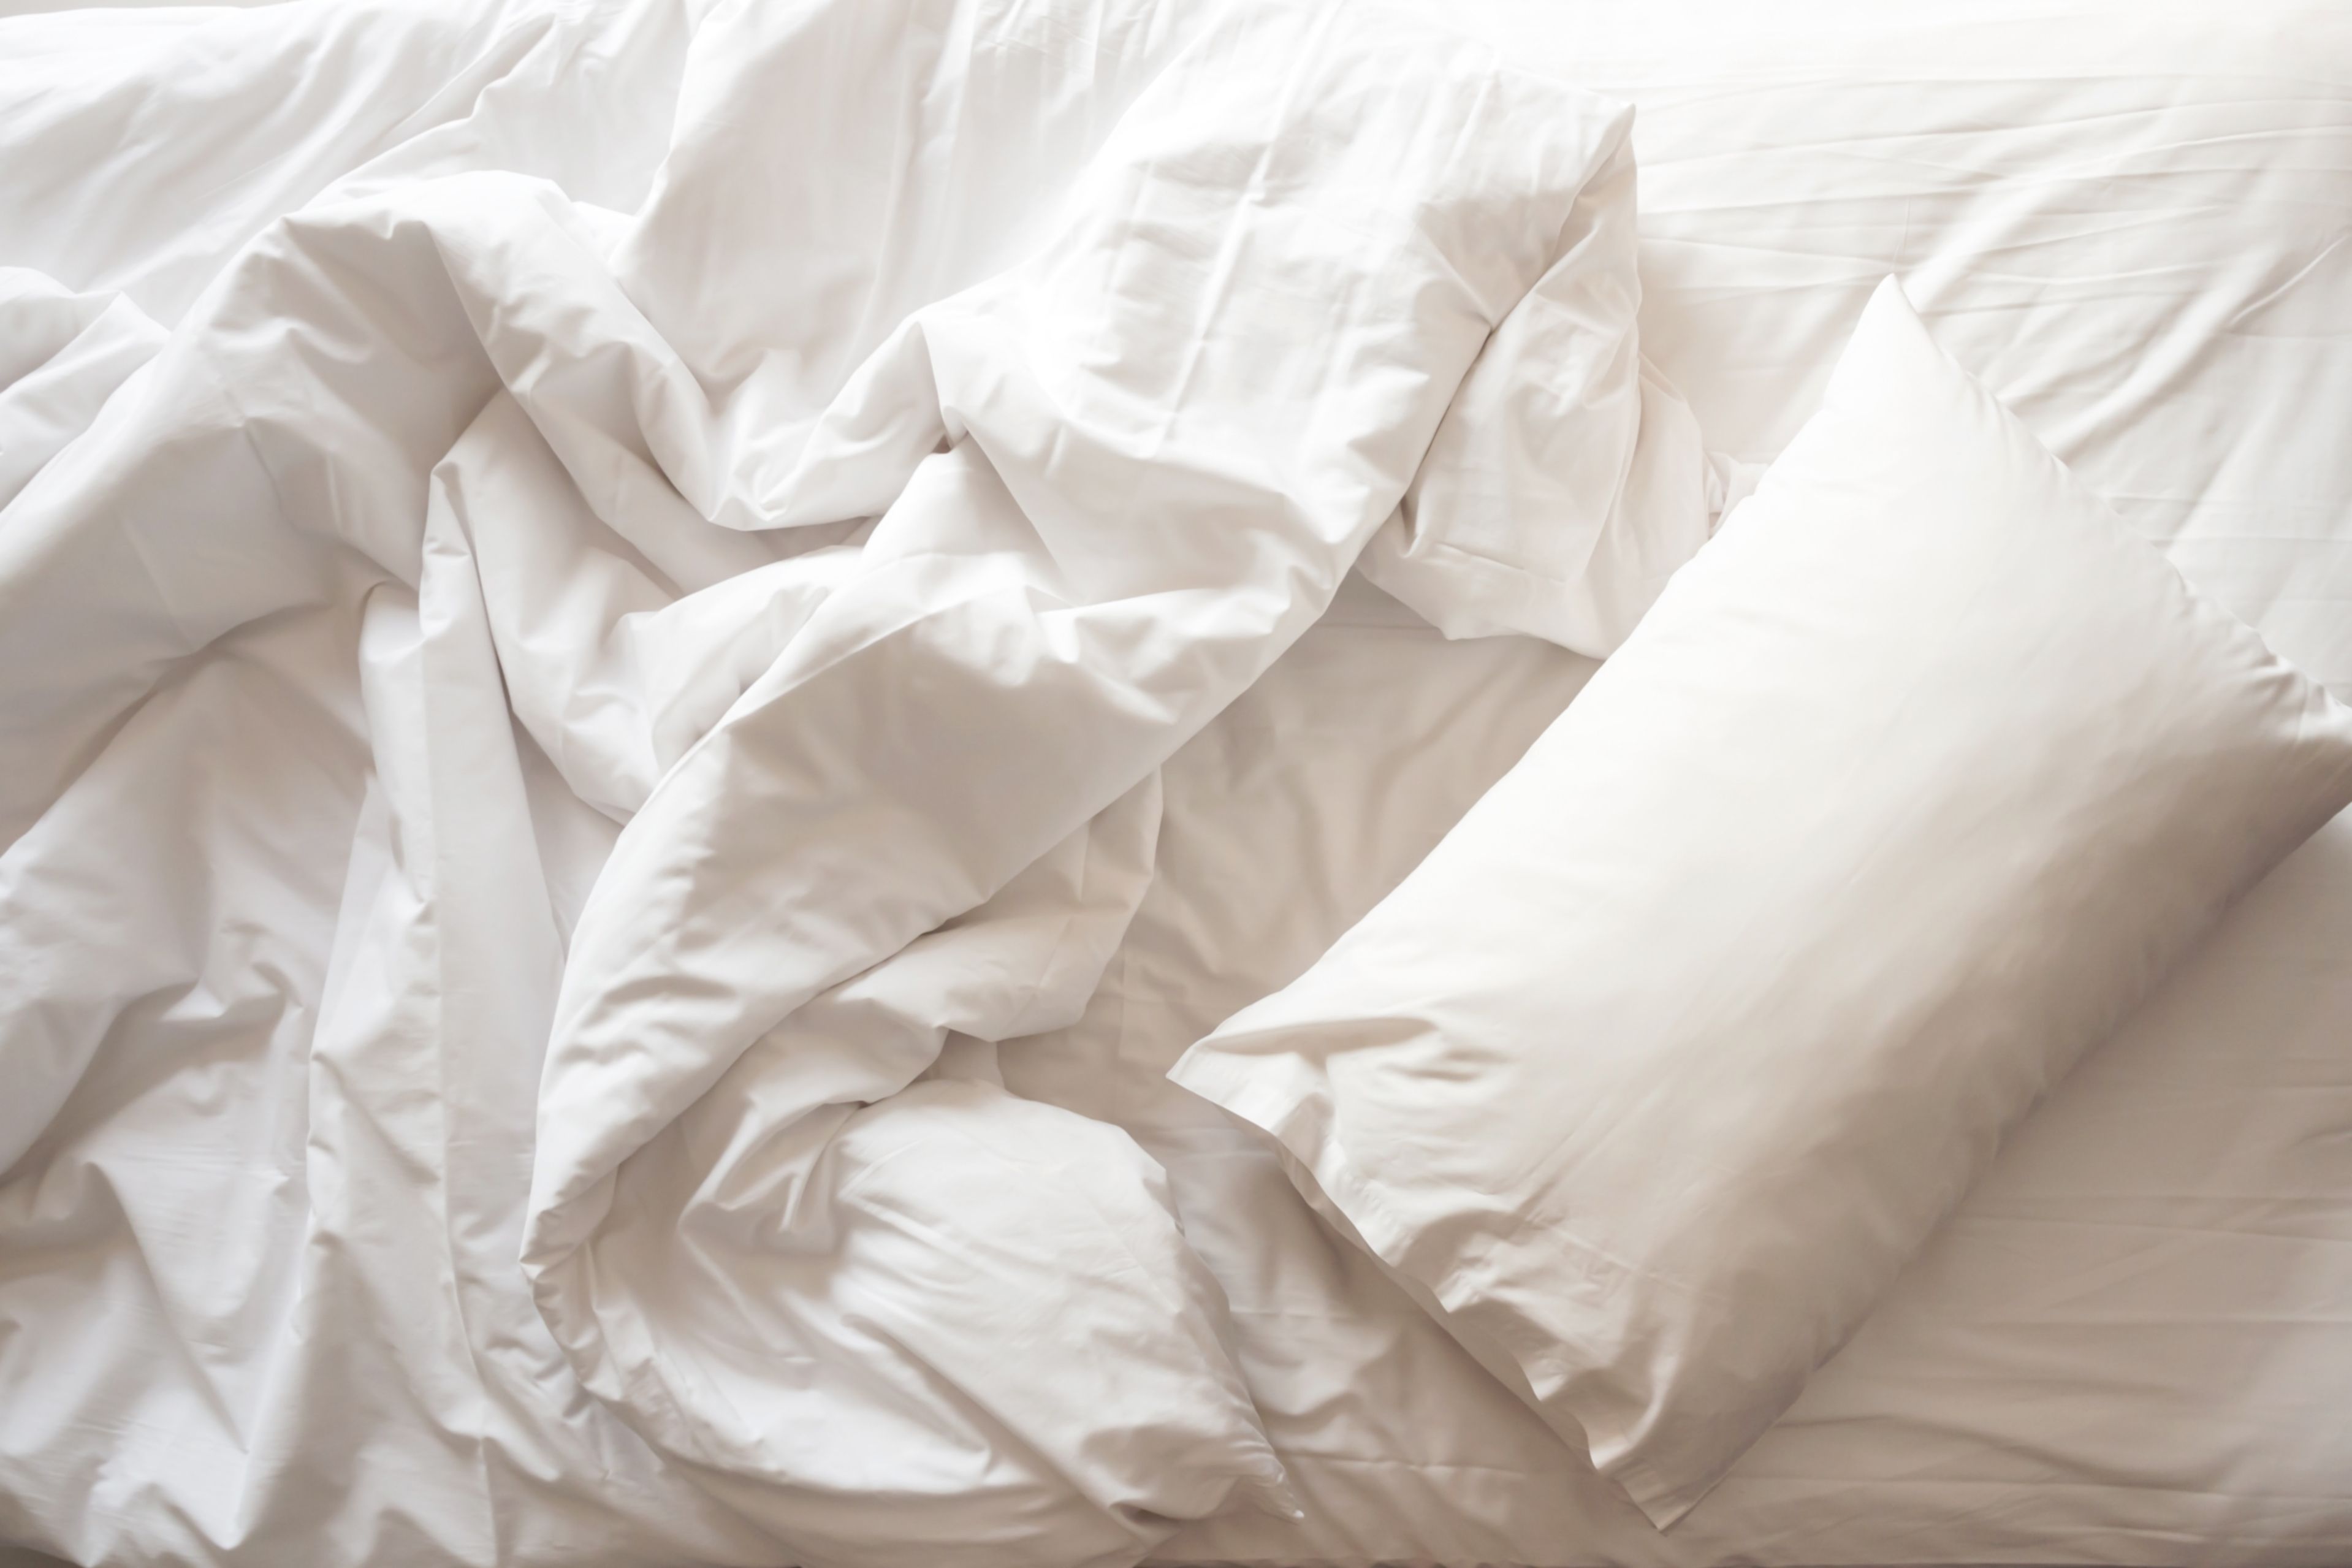 9 Creative Ways to Keep Your Fitted Sheet on Your Bed